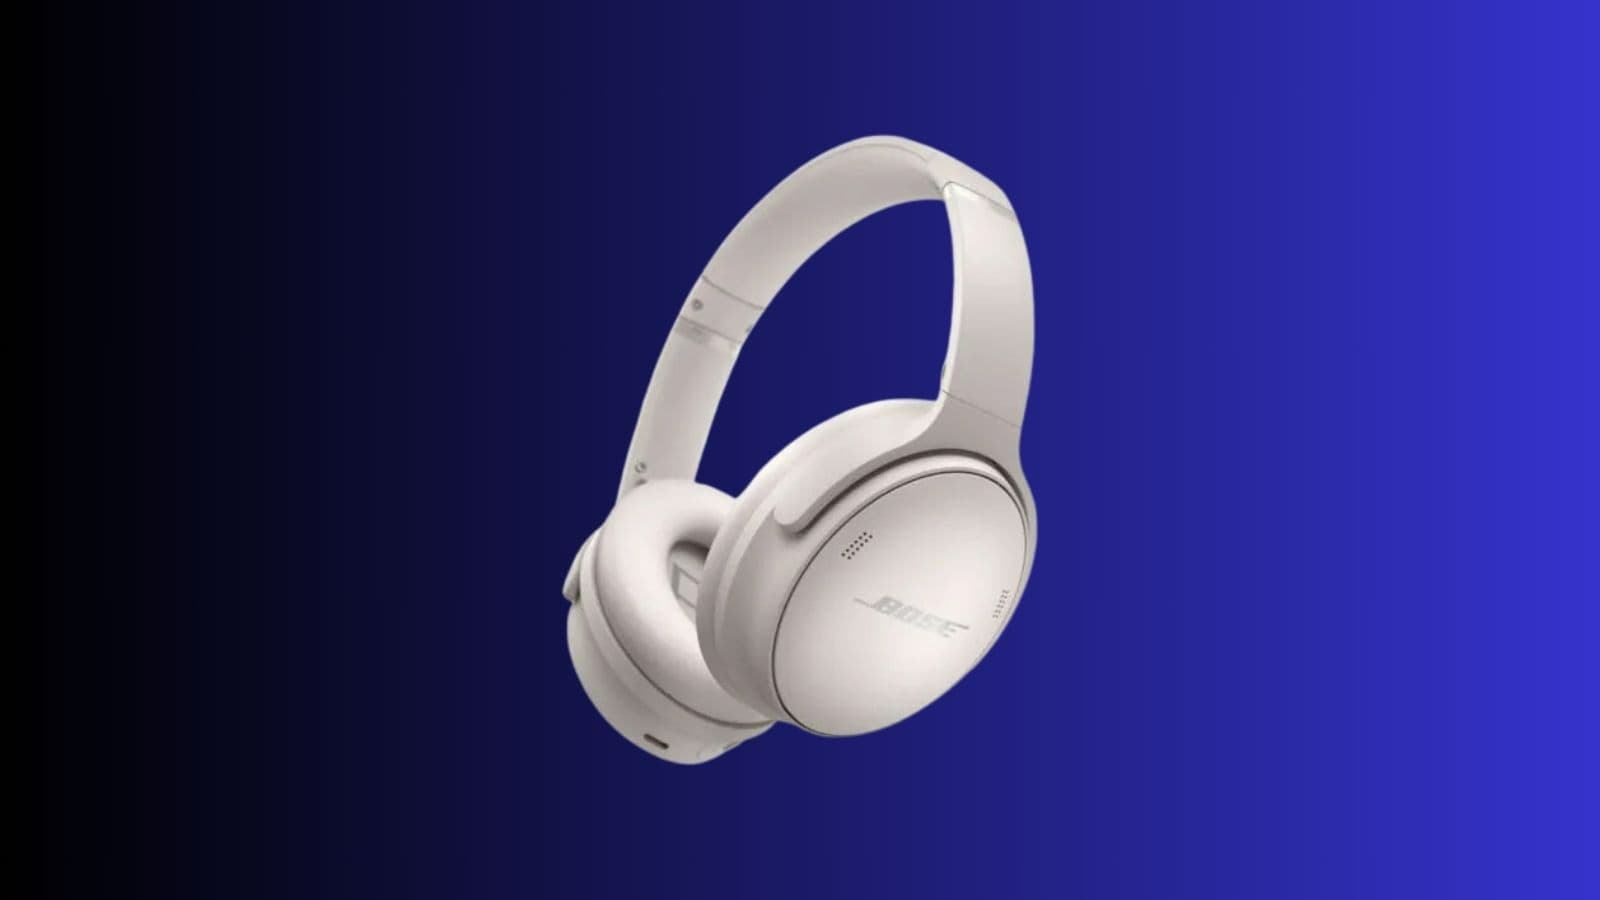 Today’s offer featured on this site is for the Bose Bluetooth QC45 Headphones.